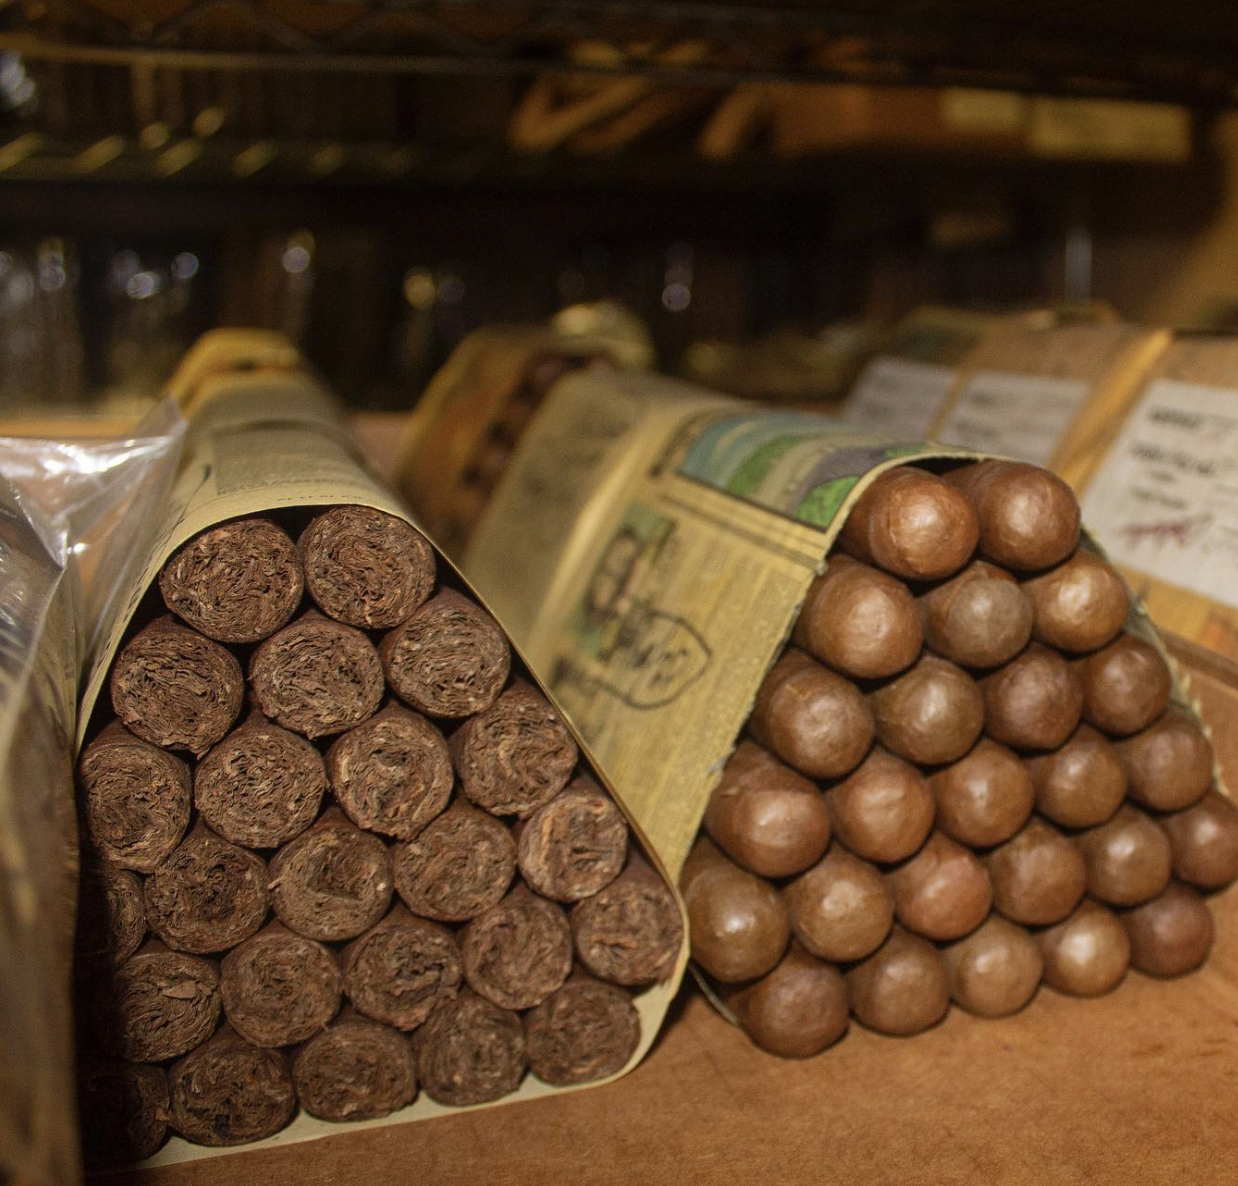 Fresh rolled cigars from Bobalu Cigar Company